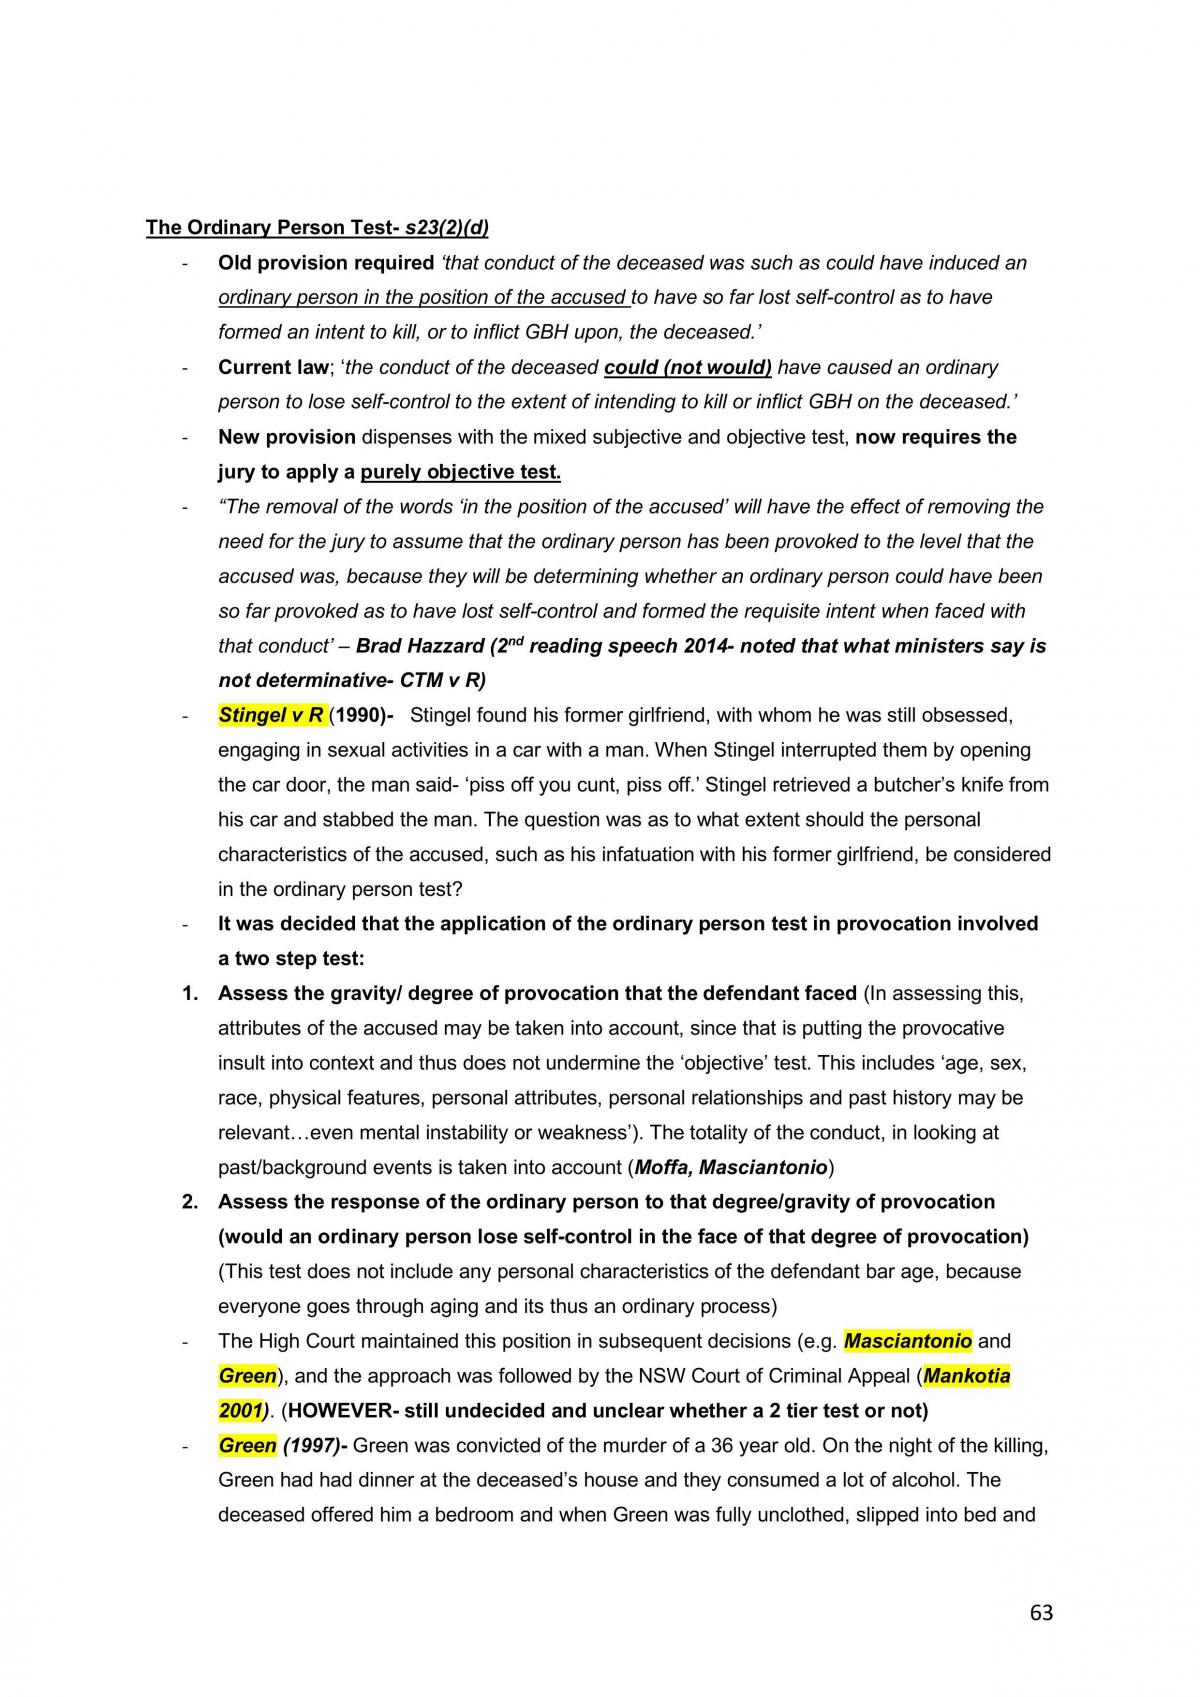 LAWS1016 Criminal Law Notes and Scaffolds - Page 63